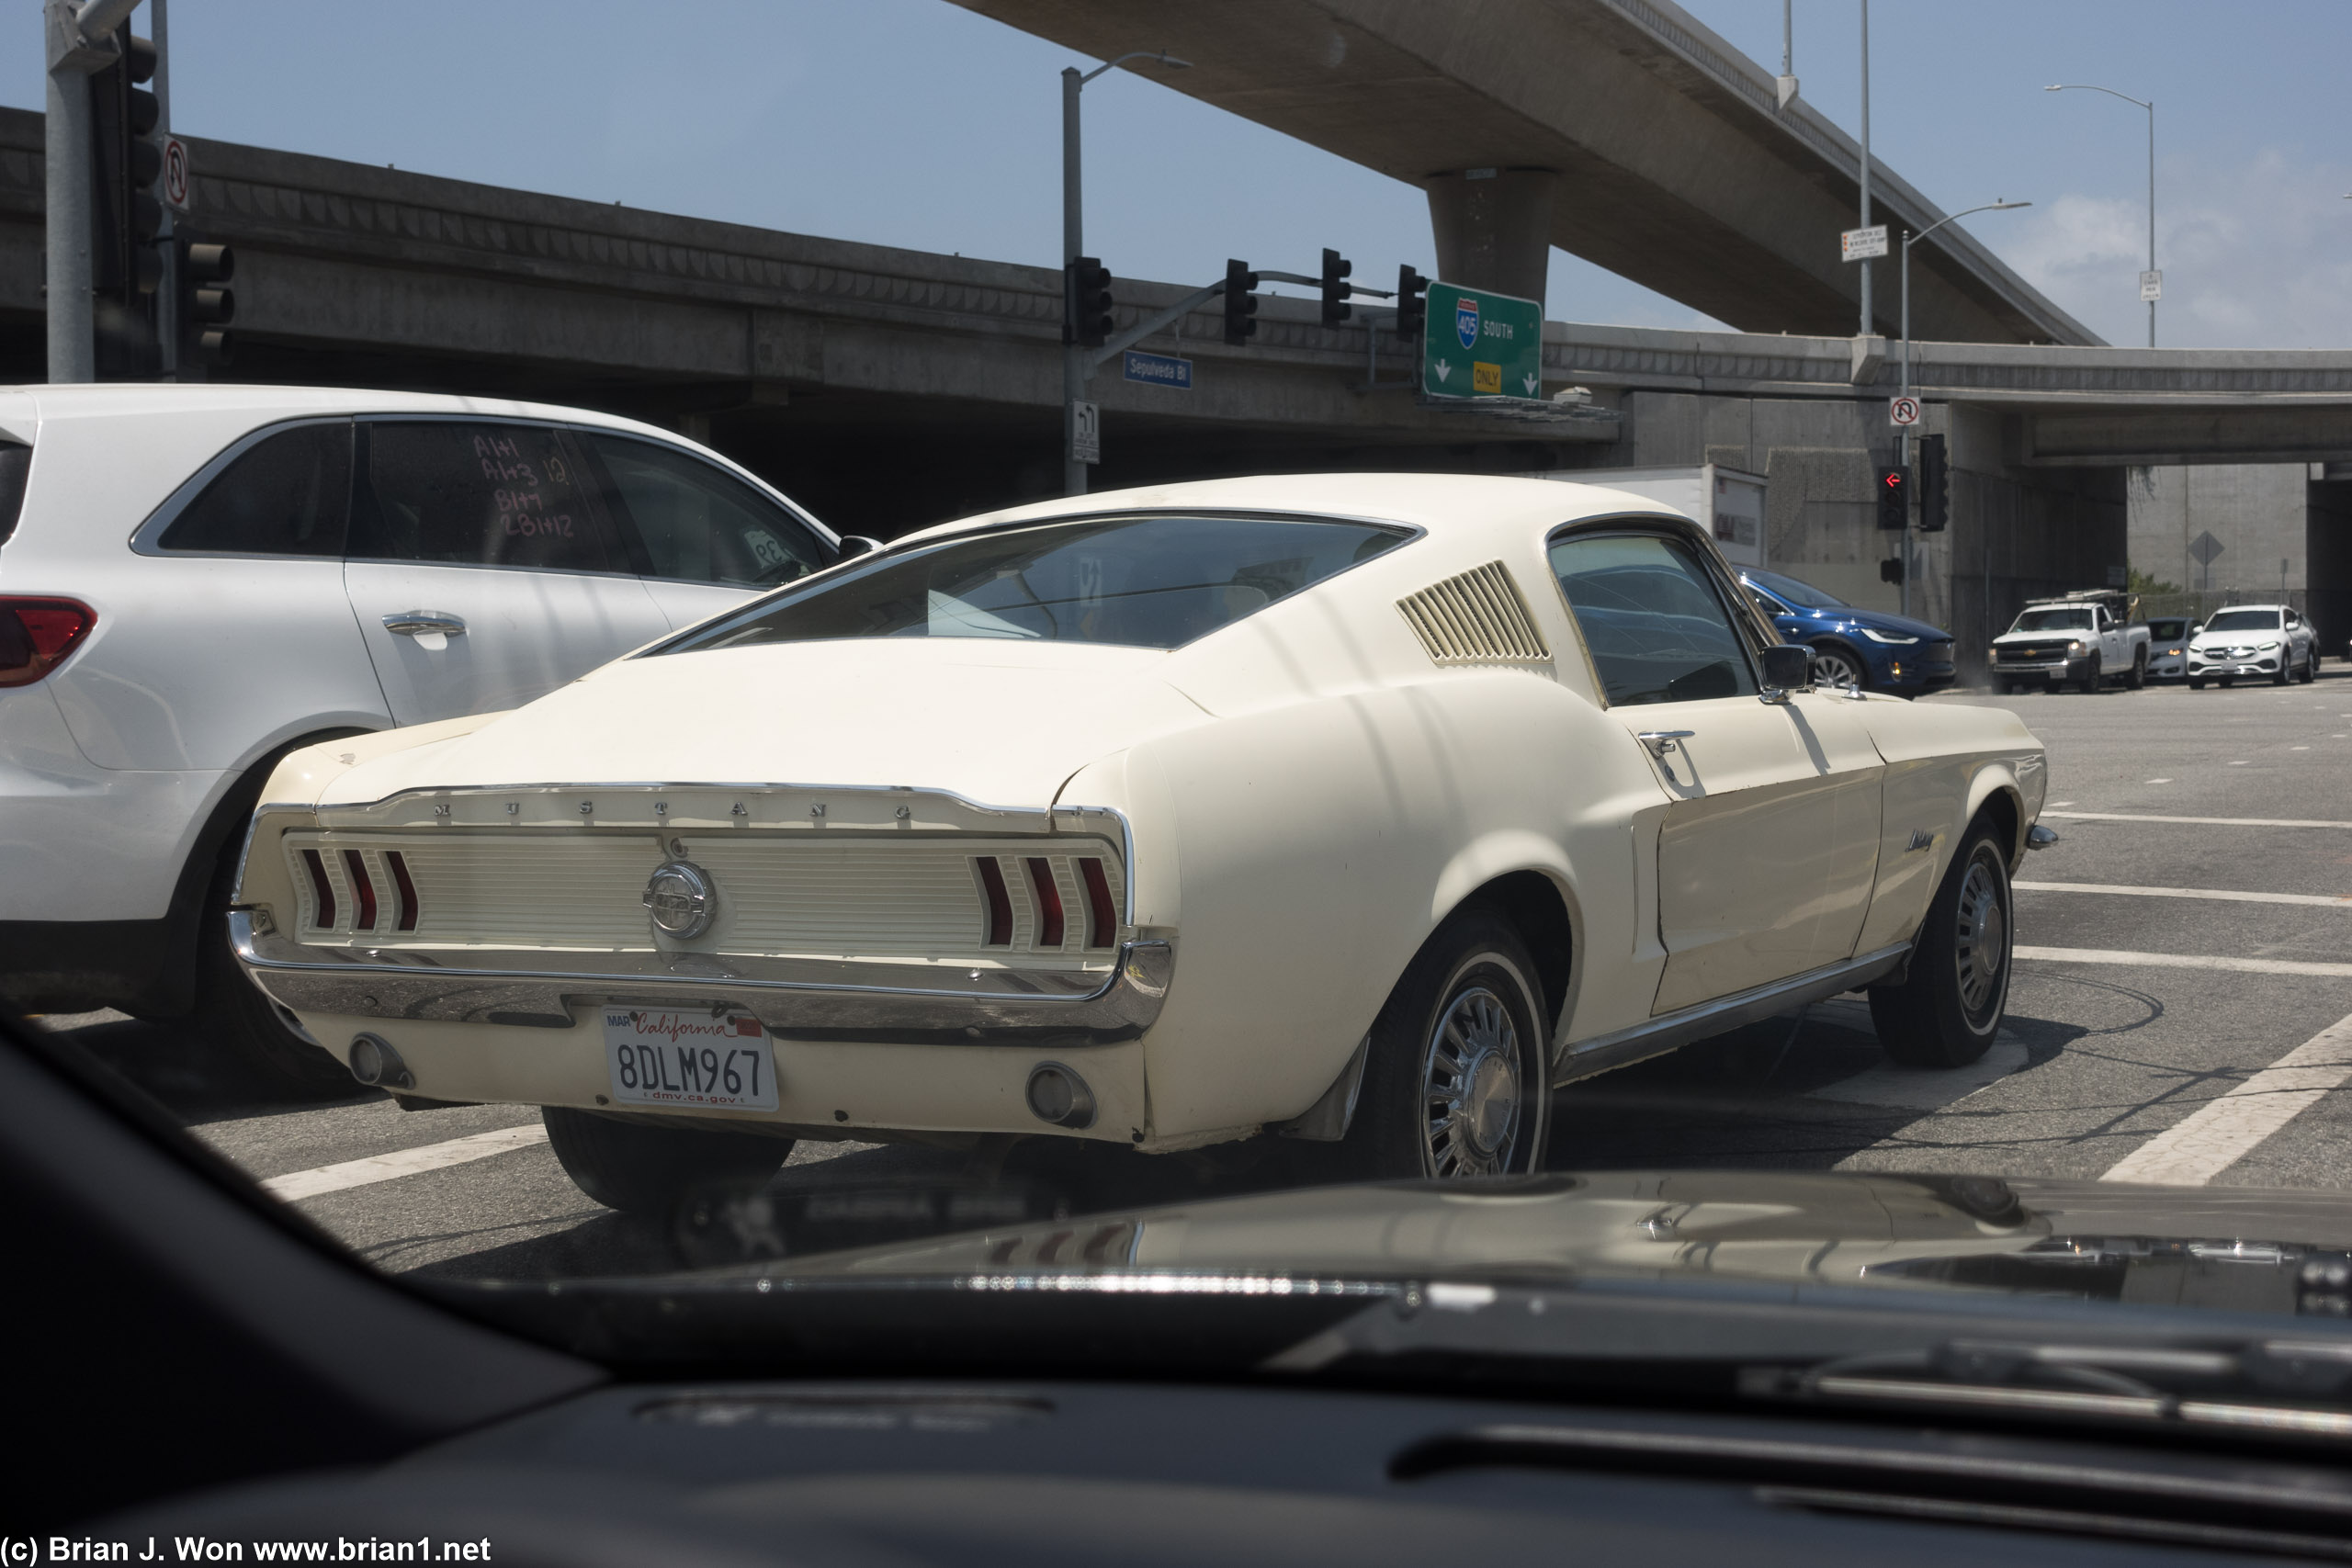 1968 Ford Mustang? (not sure on year) A bit rough but still a rare sight on the road even in a bit rough condition.